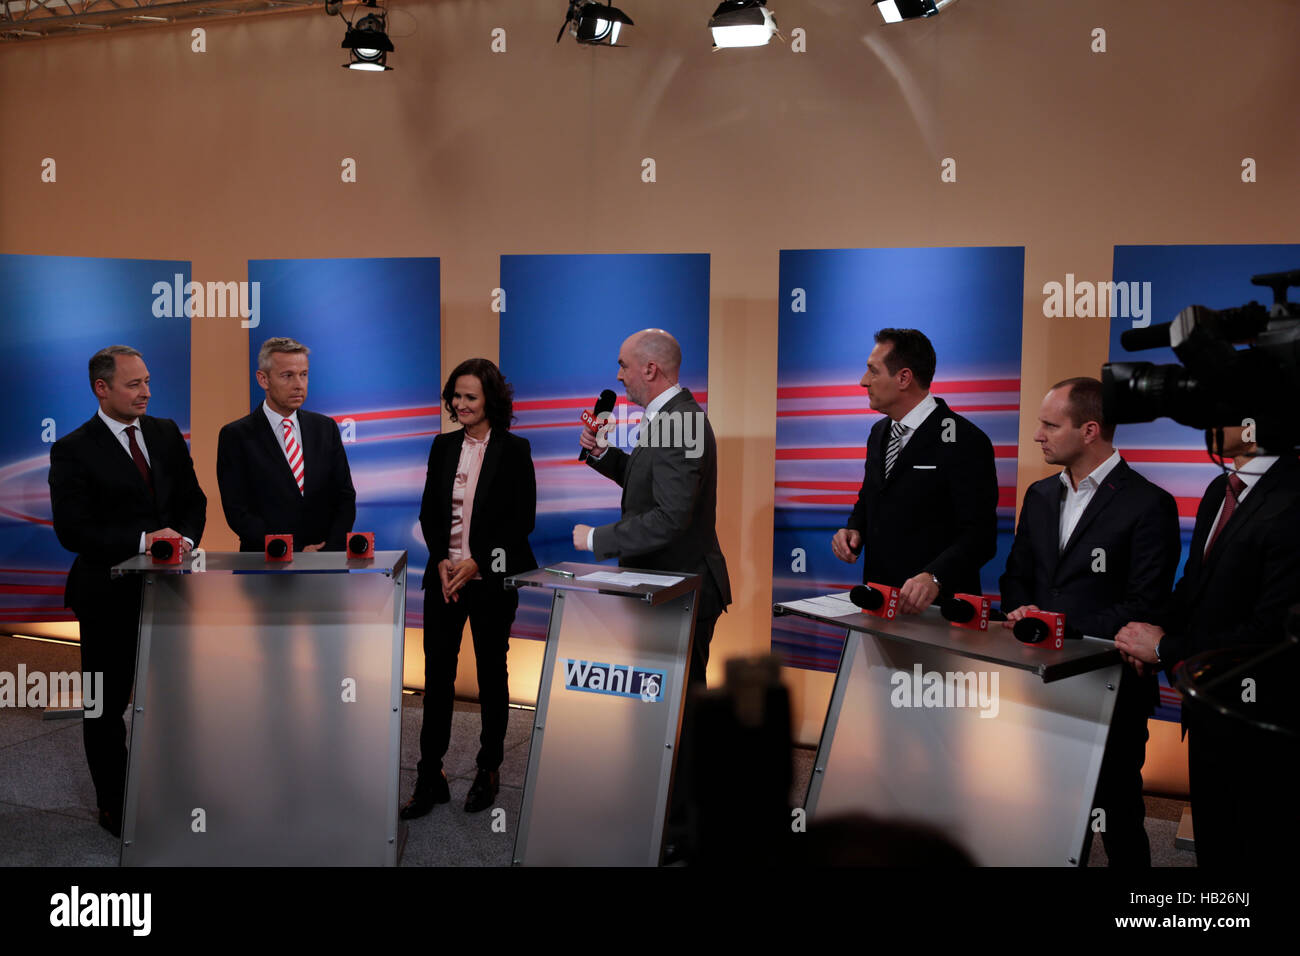 Vienna, Austria. 4th December 2016. Eva Glawischnig-Piesczek, the federal spokeswoman of the Austrian Green party speaks on TV.HC Strache, the Chairman of the Freedom Party of Austria Chairman of the Freedom Party of AustriaReinhold Lopatka, the chairman of the parliamentary party of the Austrian People's Party (ÖVP), talks on TV.Politicians of all parties discuss the Presidential election results on TV. Preliminary results see independent candidate Alexander Van der Bellen as the winner of the Austrian Presidential elections. He and loosing candidate Norbert Hofer, as well as politicians from Stock Photo